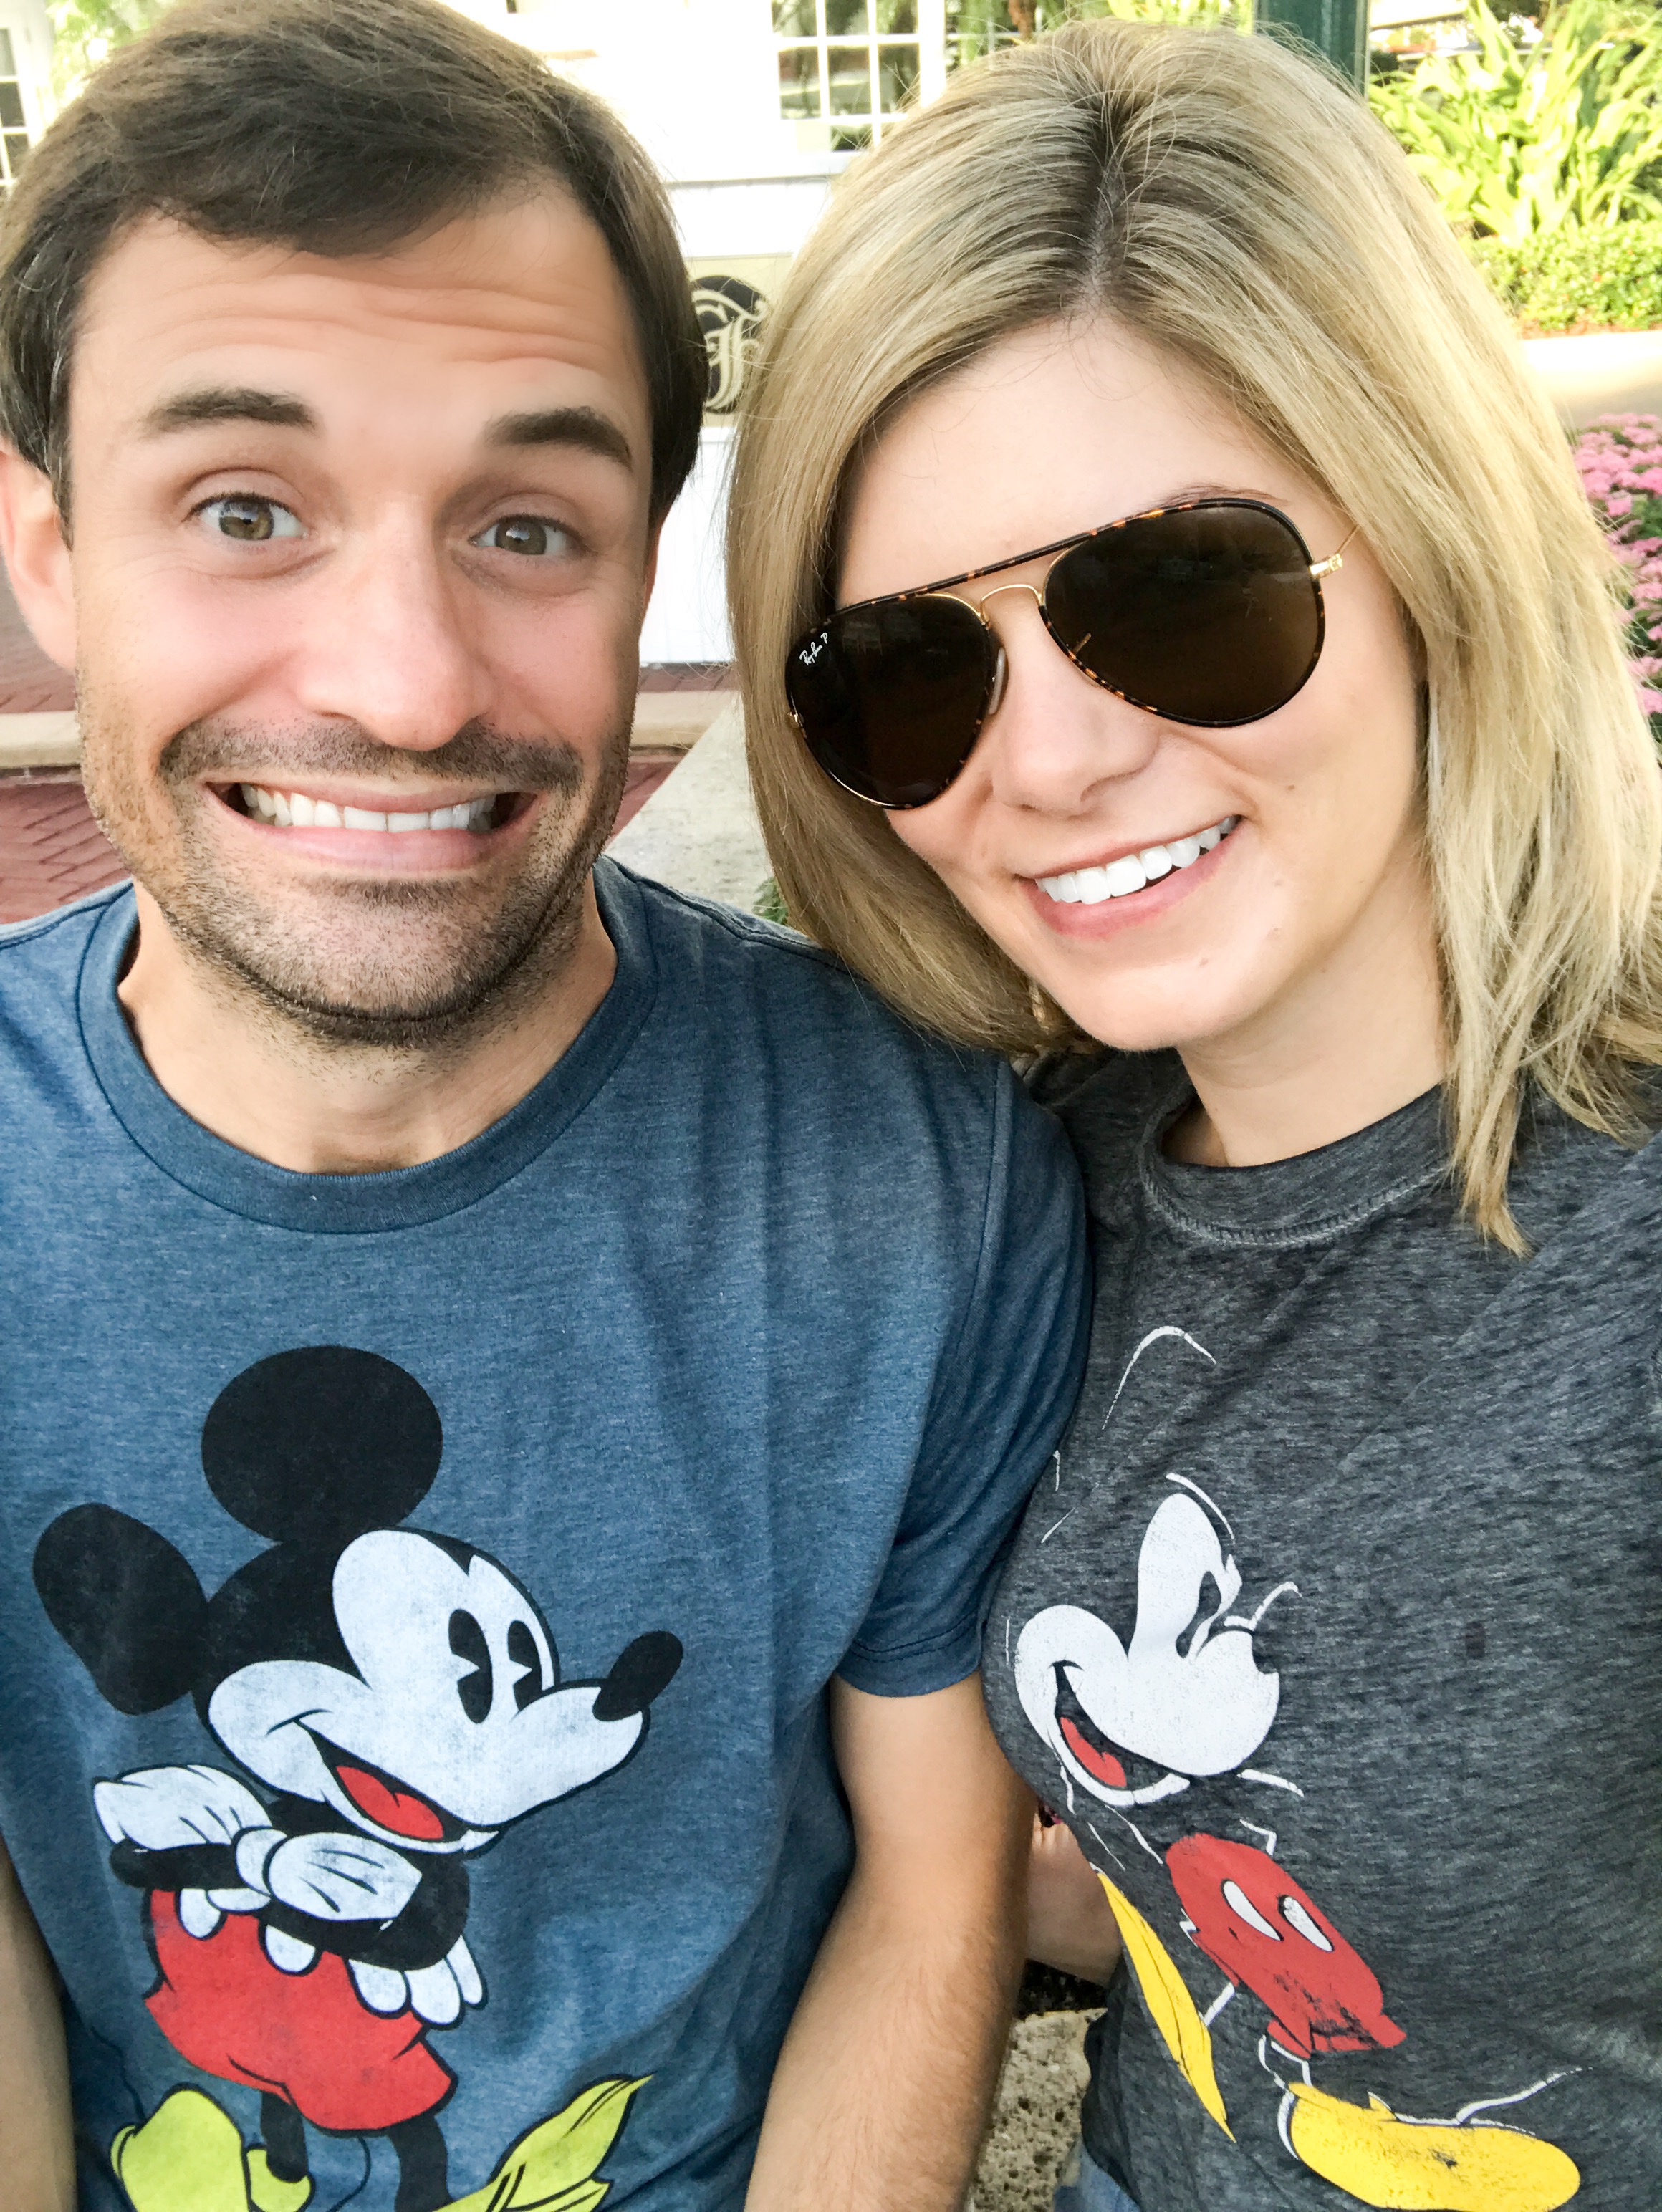 Mickey Mouse tees in Disney World